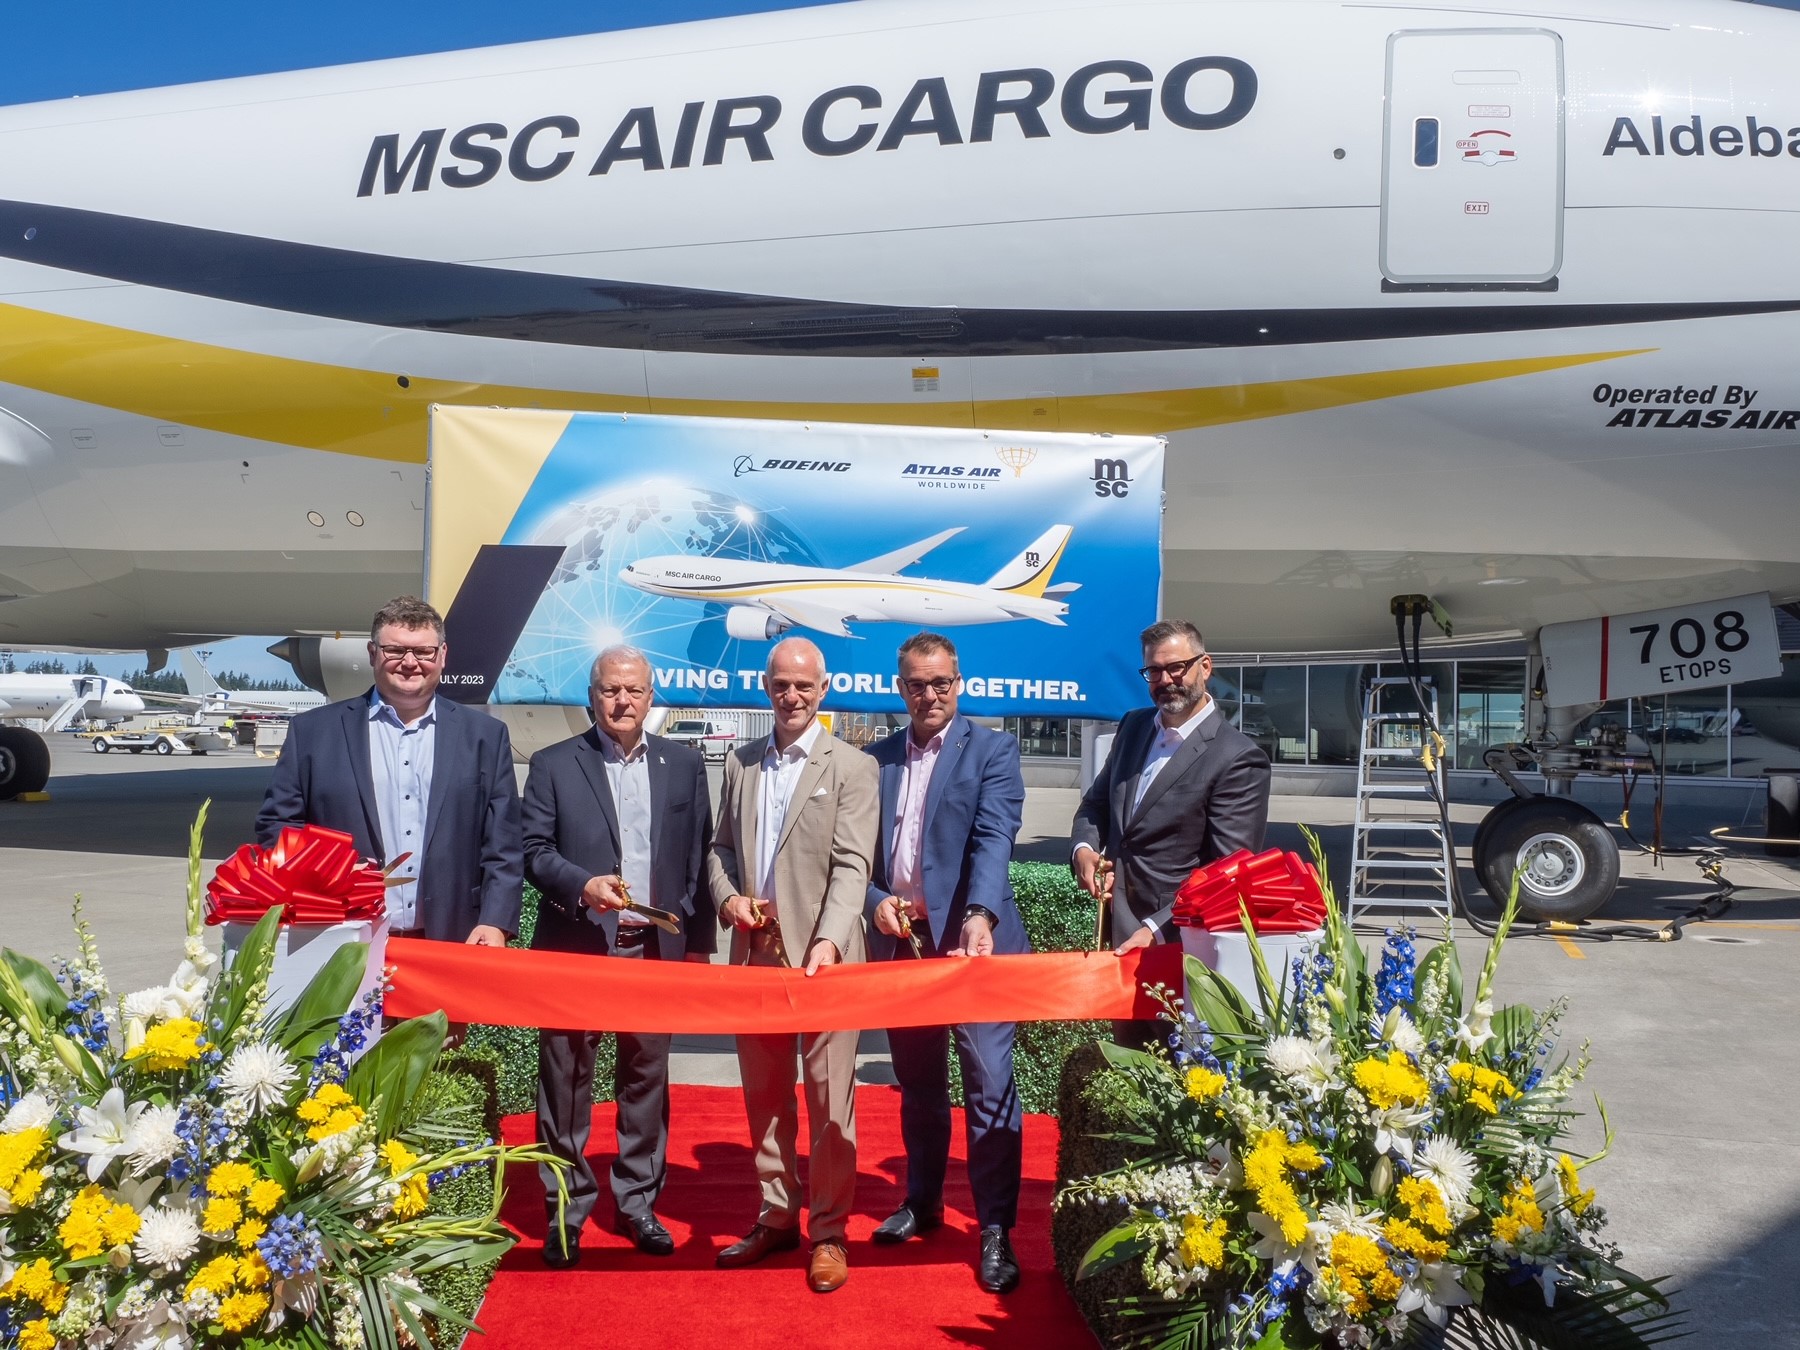 Atlas Air Takes Delivery of Second of Four New Boeing 777-200 Freighters to be Operated for MSC’s Air Cargo Solution